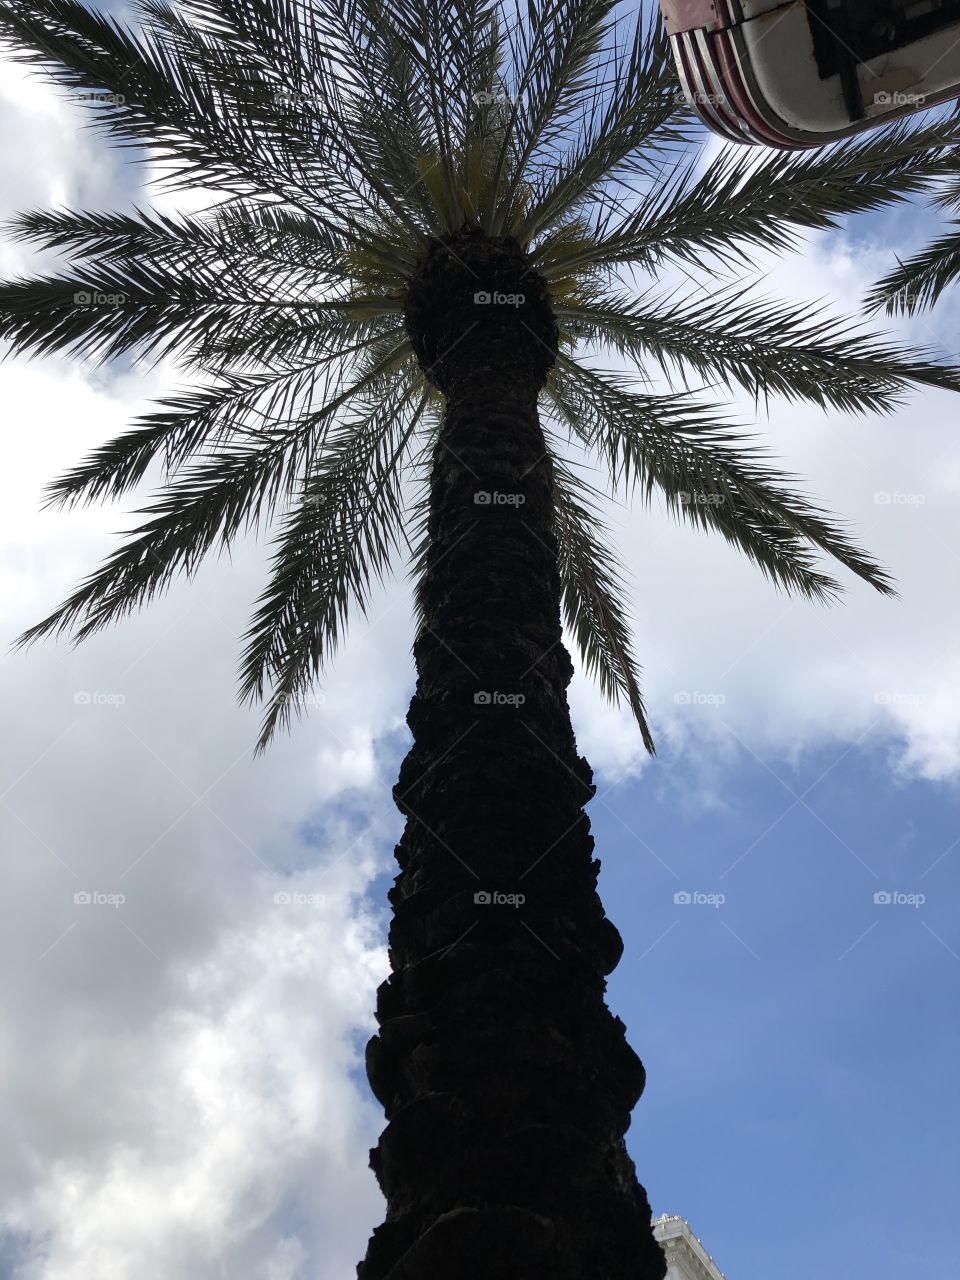 A tall and glamorous palm tree soaking up the sun in New Orleans, Louisiana. 